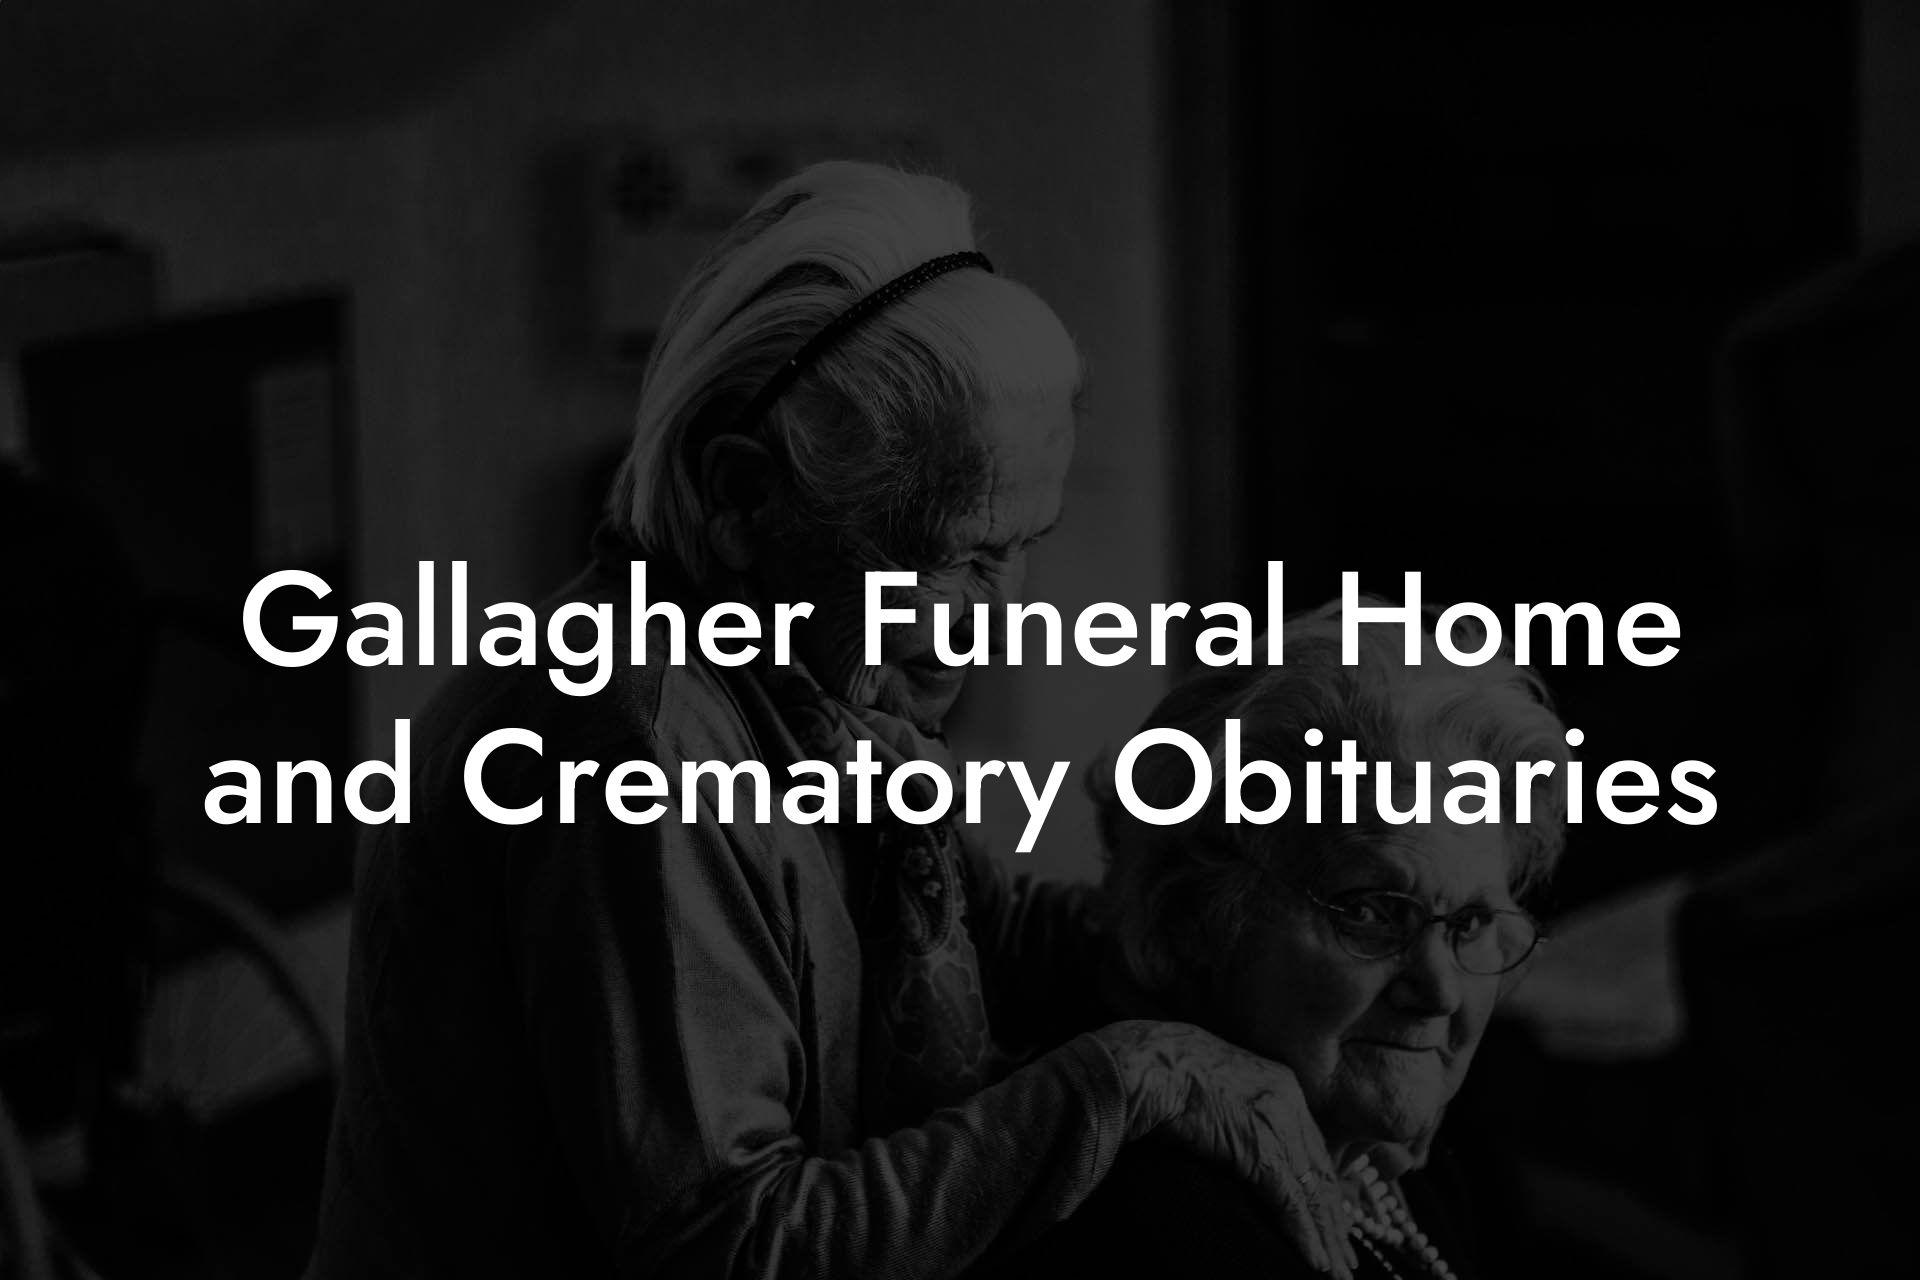 Gallagher Funeral Home and Crematory Obituaries